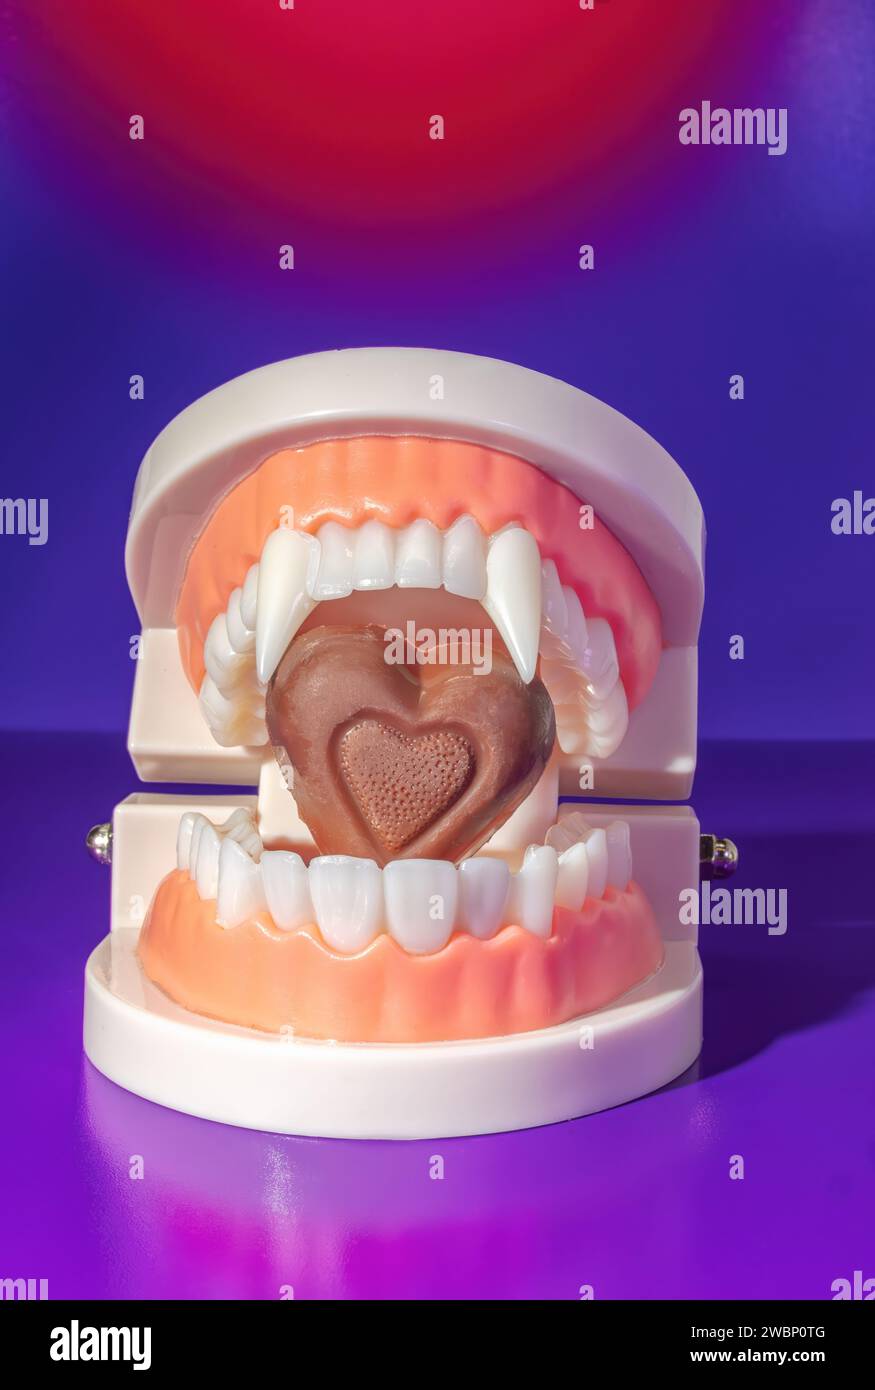 A Vampire Mouth Biting Into Milk Chocolate Heart, Taking a Bite Out of Love Concept Stock Photo